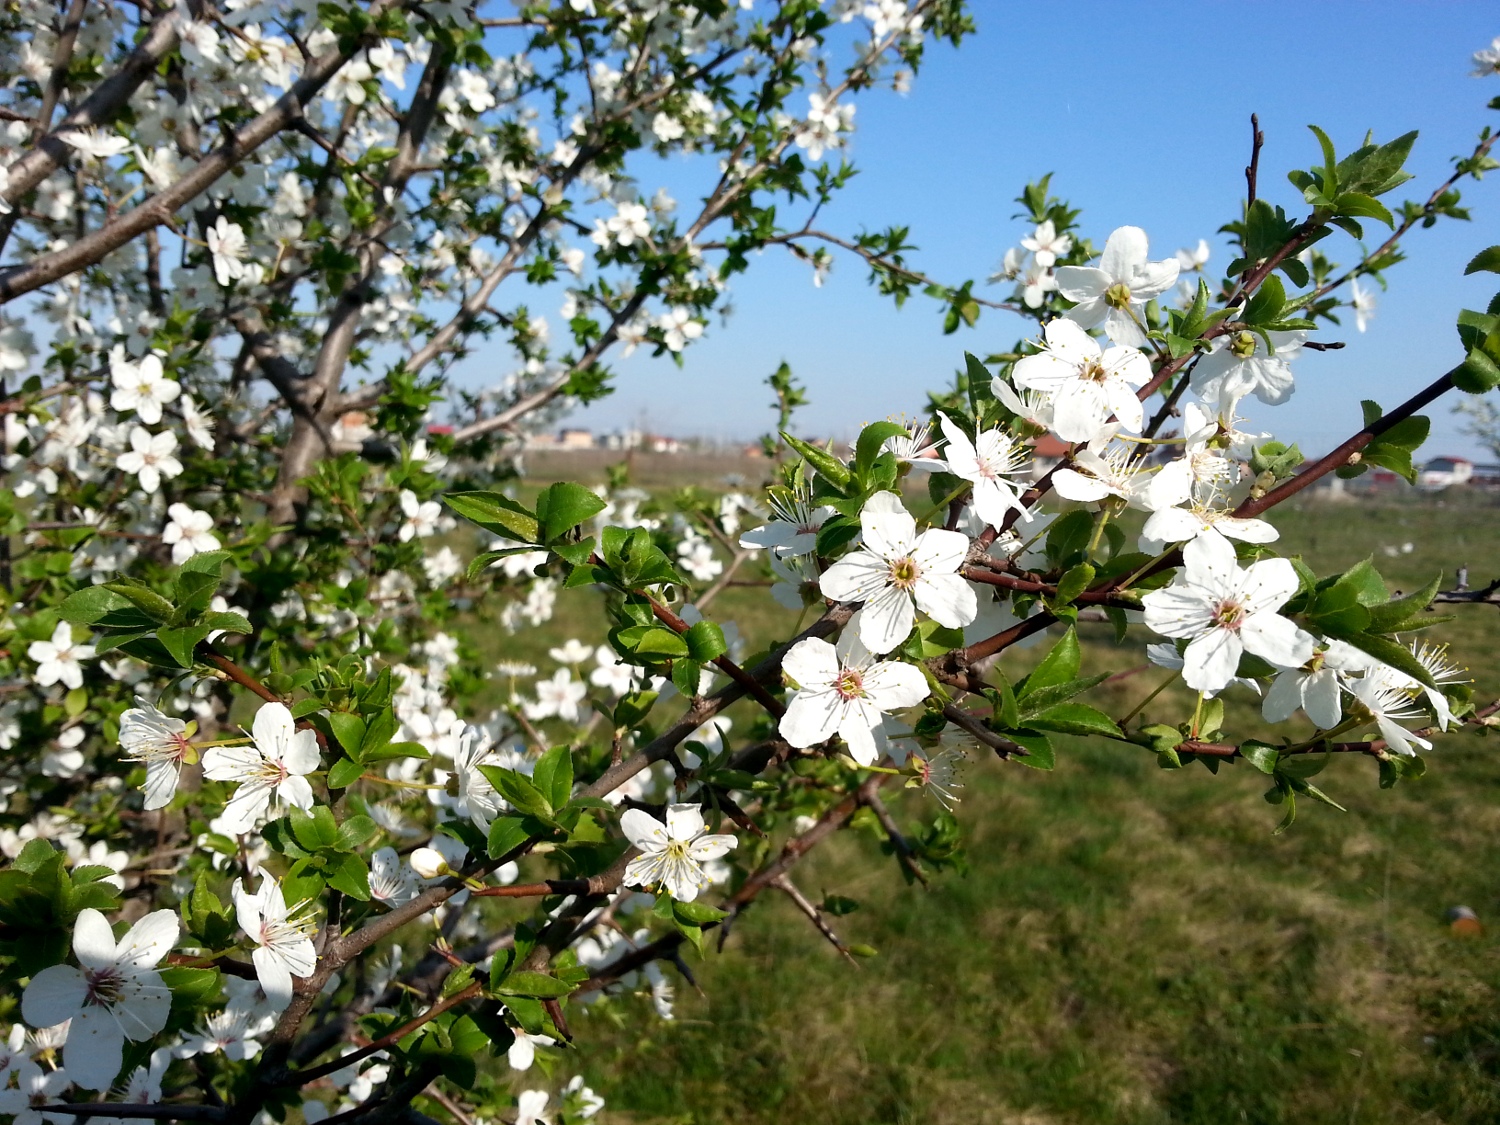 Spring blossoms: apricot tree, cherry blossom and others